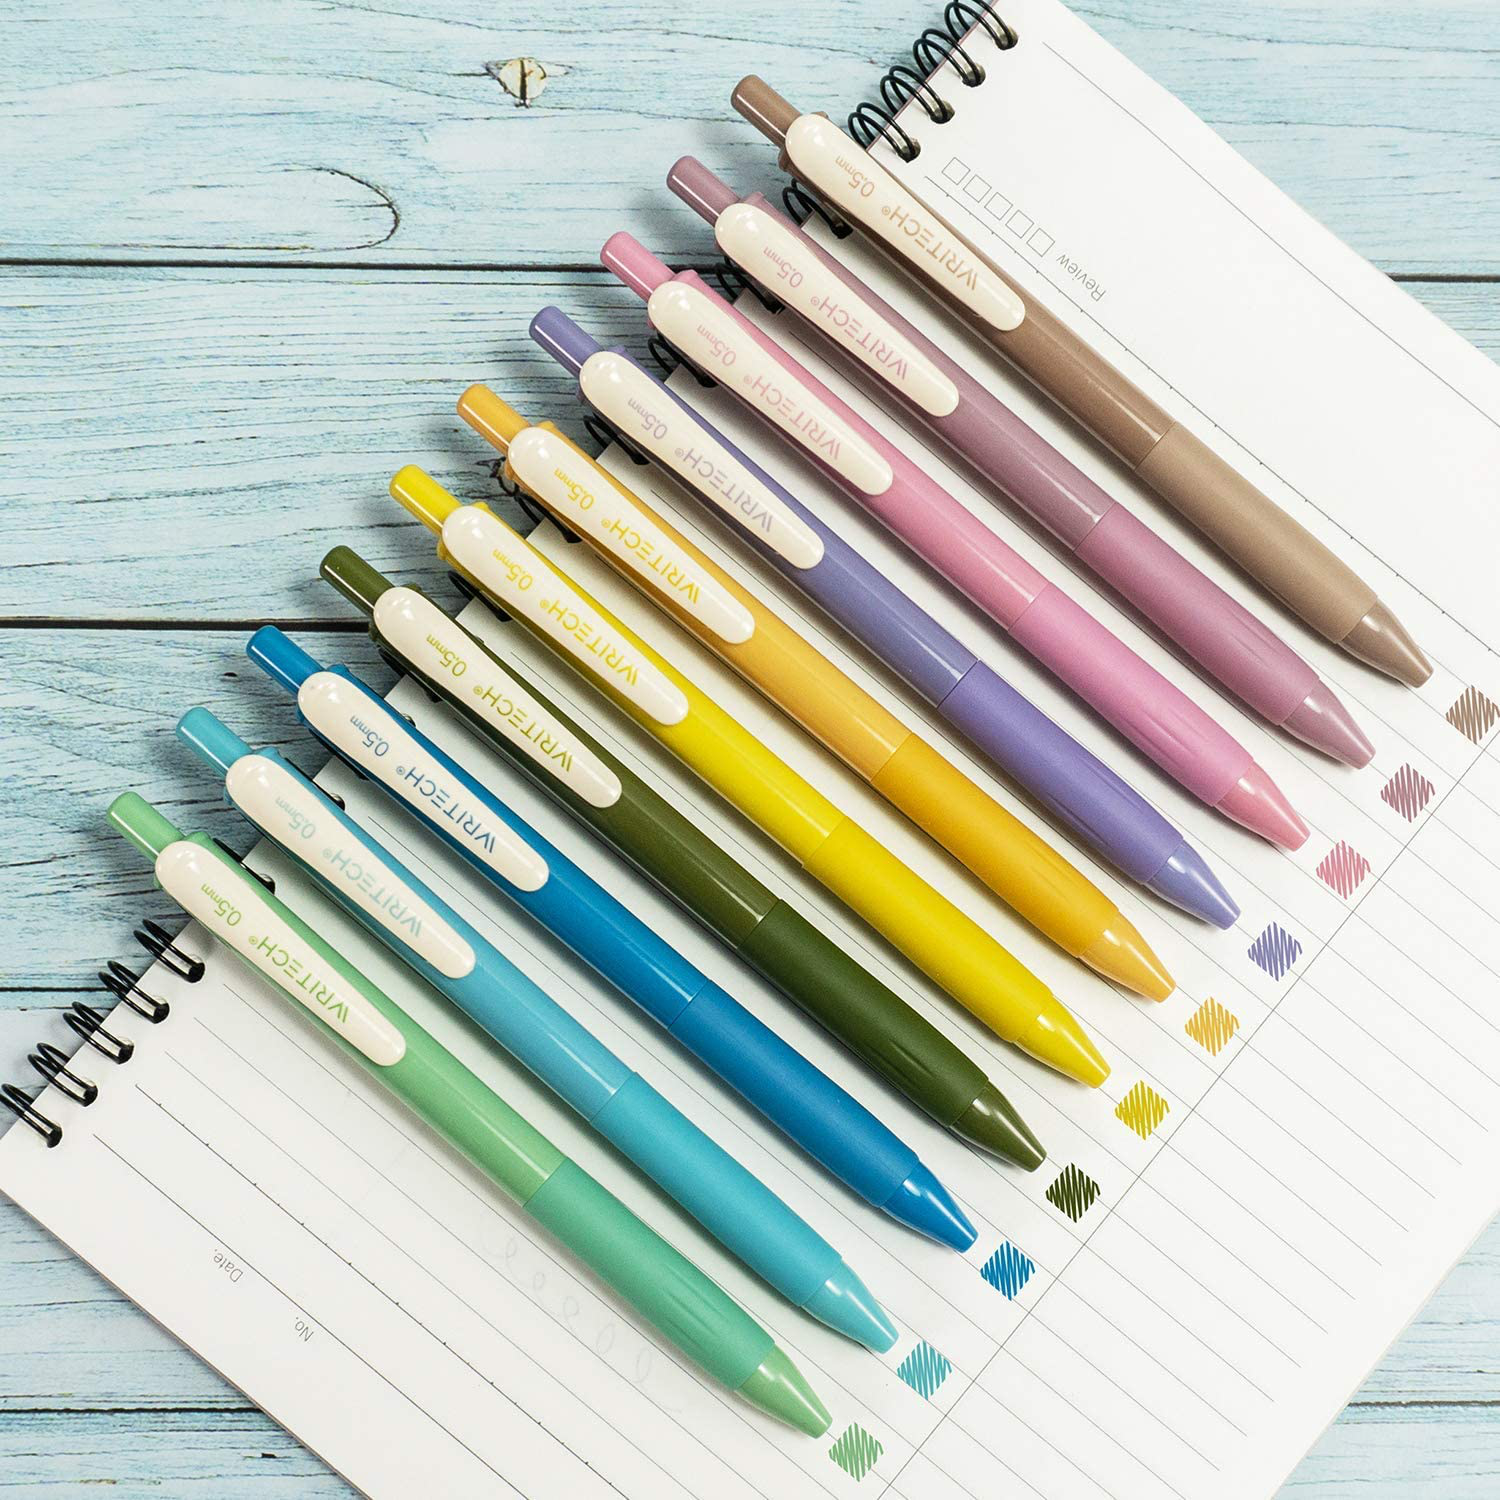 Writech Retractable Gel Pens Quick Dry Ink Pens Fine Point 0.5mm 10  Assorted Unique Vintage Colors For Journaling Drawing